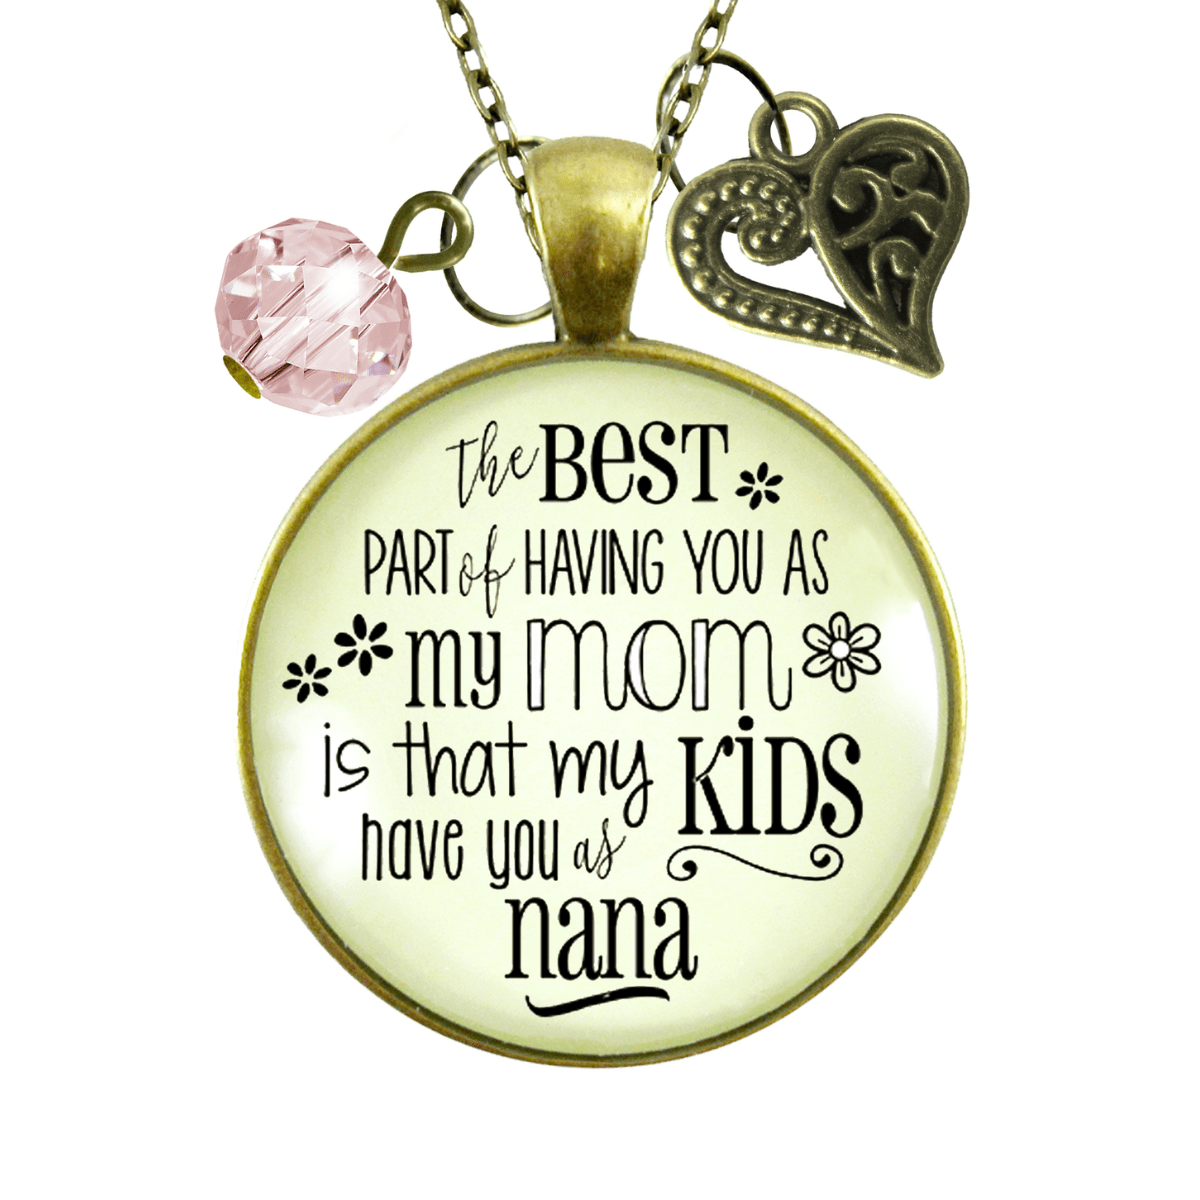 Gutsy Goodness Nana Necklace Best Part You as Mom Kids Grandma Jewelry Gift From Daughter - Gutsy Goodness Handmade Jewelry;The Best Part Of Having You As My Mom - Nana - Kids - Heart - Gutsy Goodness Handmade Jewelry Gifts